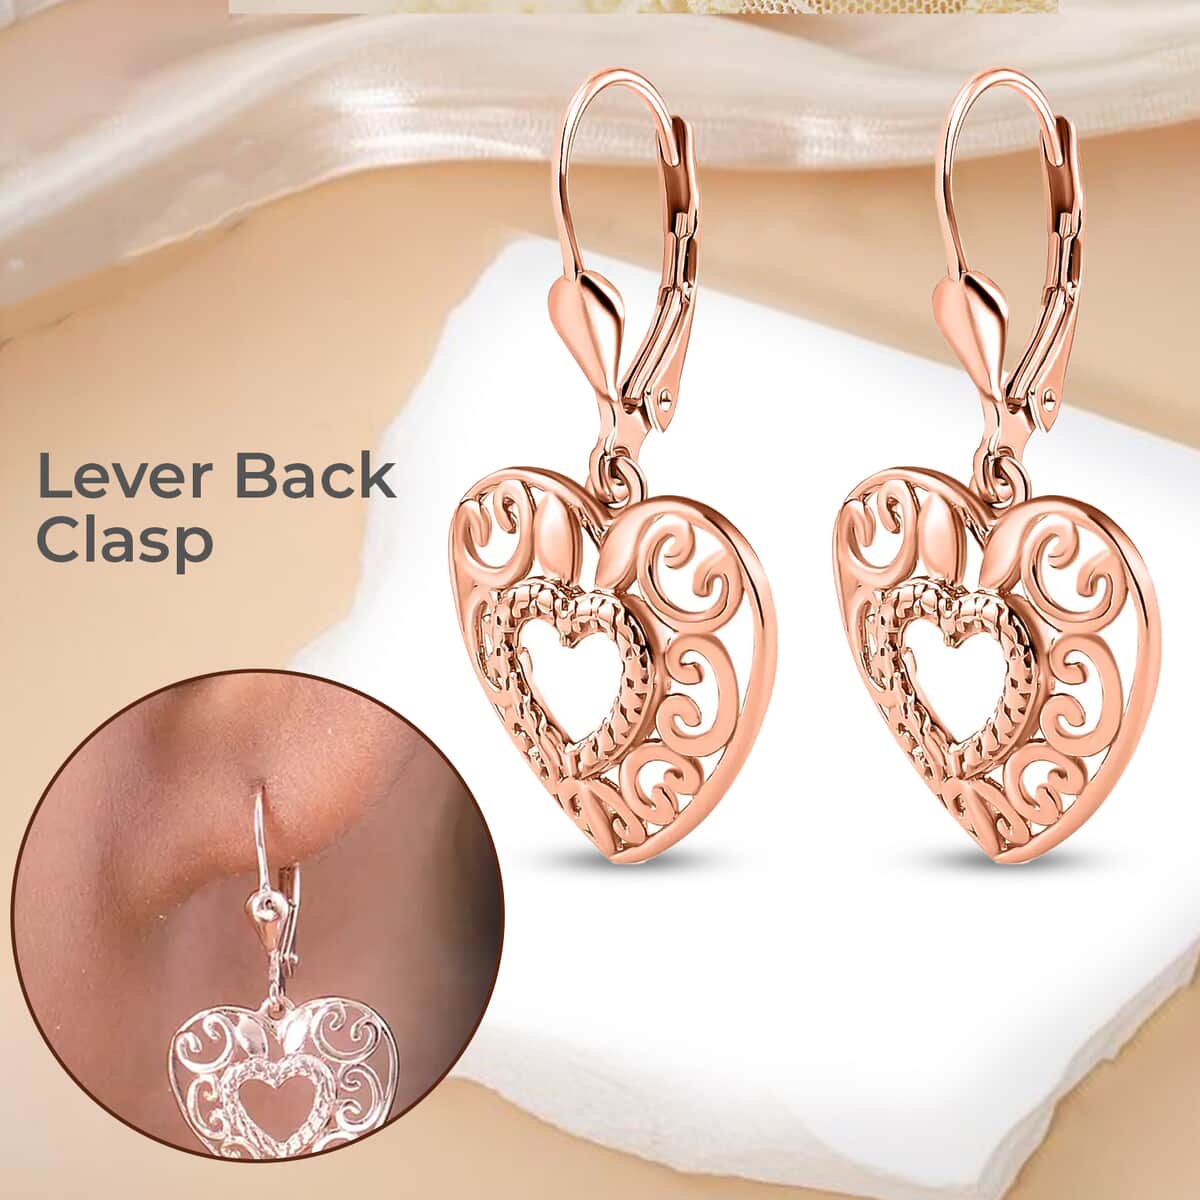 Mother’s Day Gift Openwork Earrings, Filigree Earrings, Lever Back Earrings, Drop Earrings, 14K Rose Gold Plated Sterling Silver Earrings, Heart Earrings For Women, Jewelry Gifts For Birthday image number 3